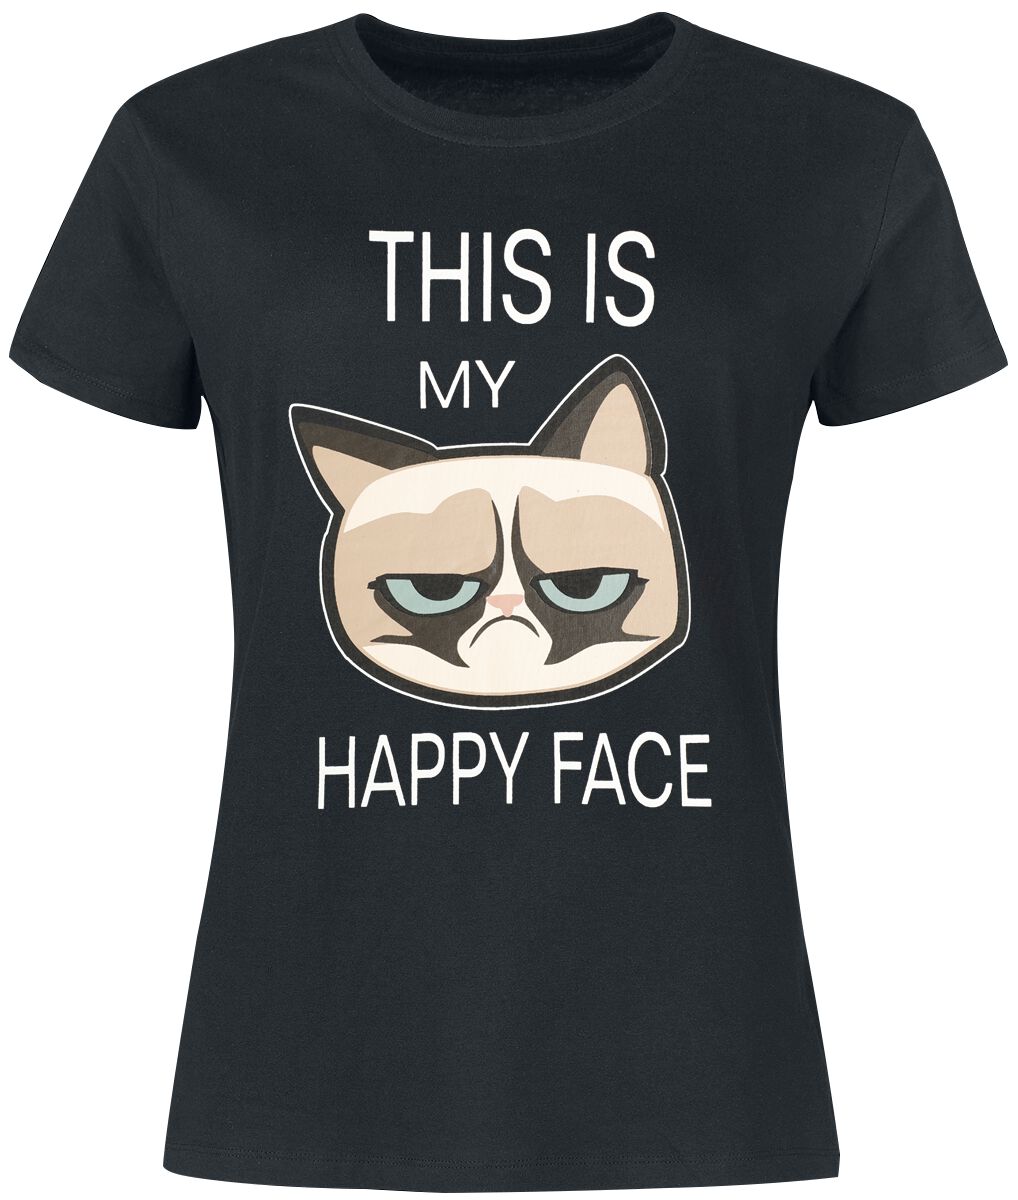 Grumpy Cat This Is My Happy Face T-Shirt schwarz in L